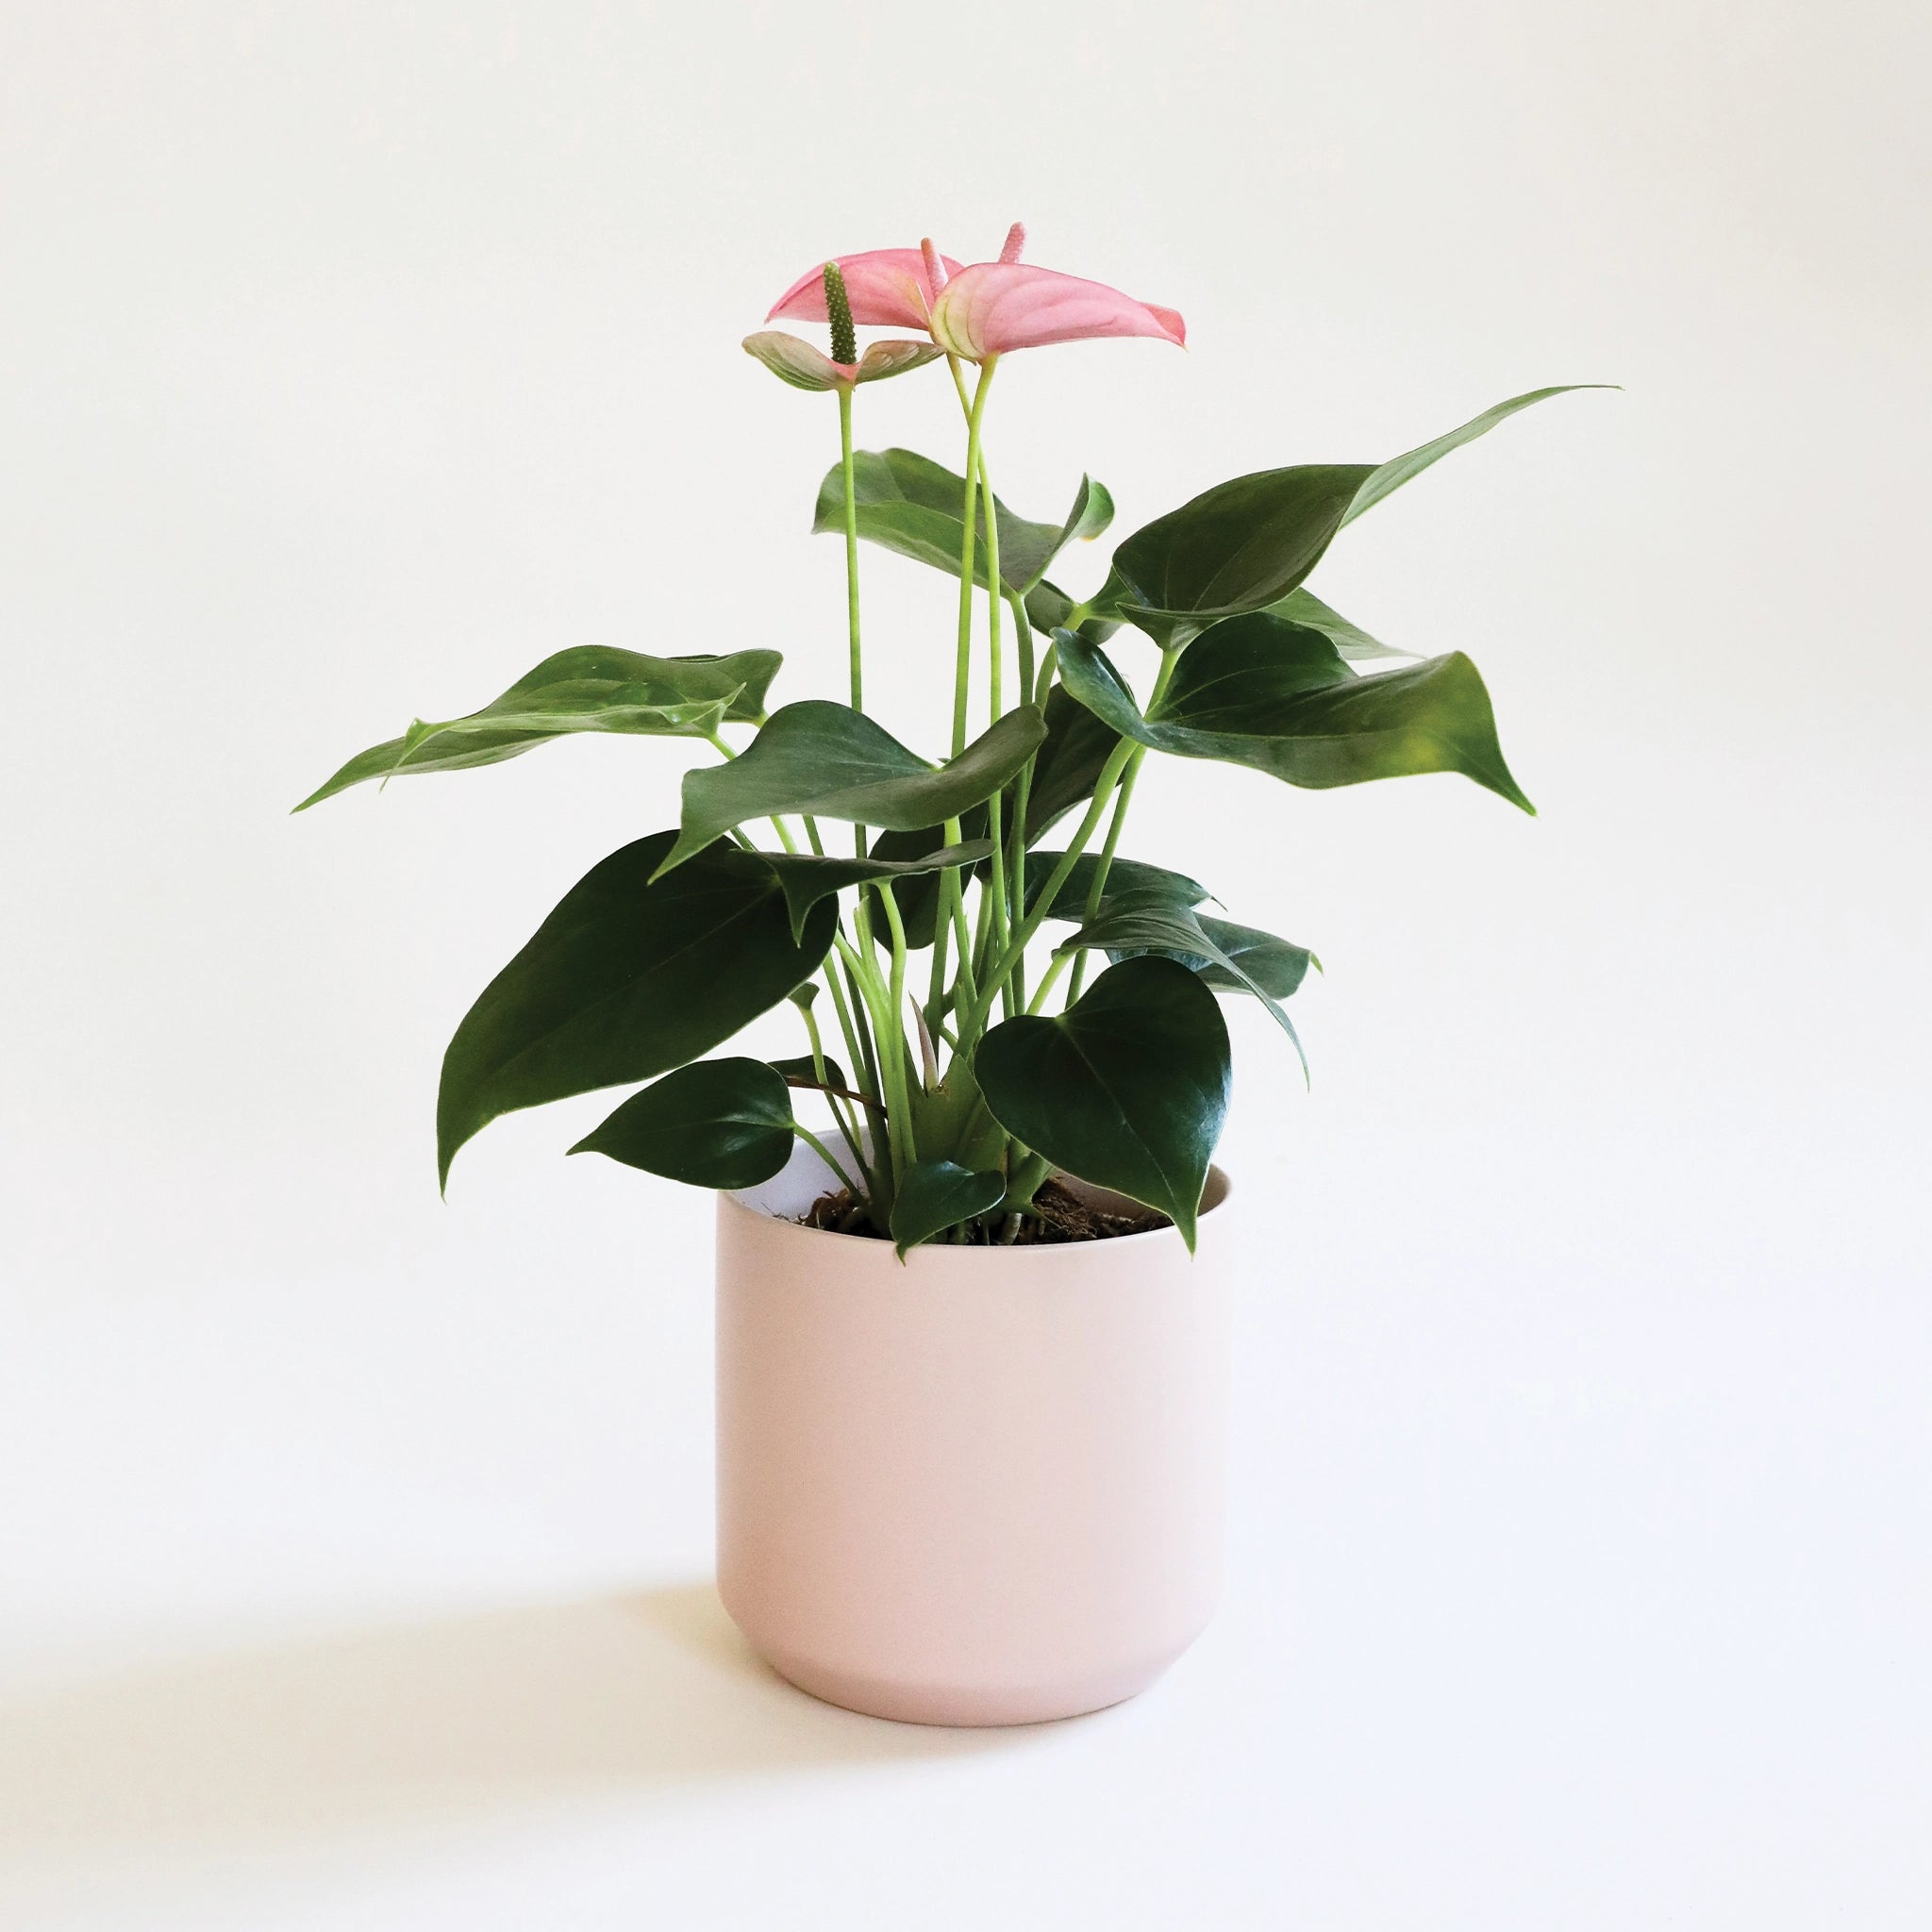 On a cream background is a light pink ceramic planter with a plant inside that is not included. 